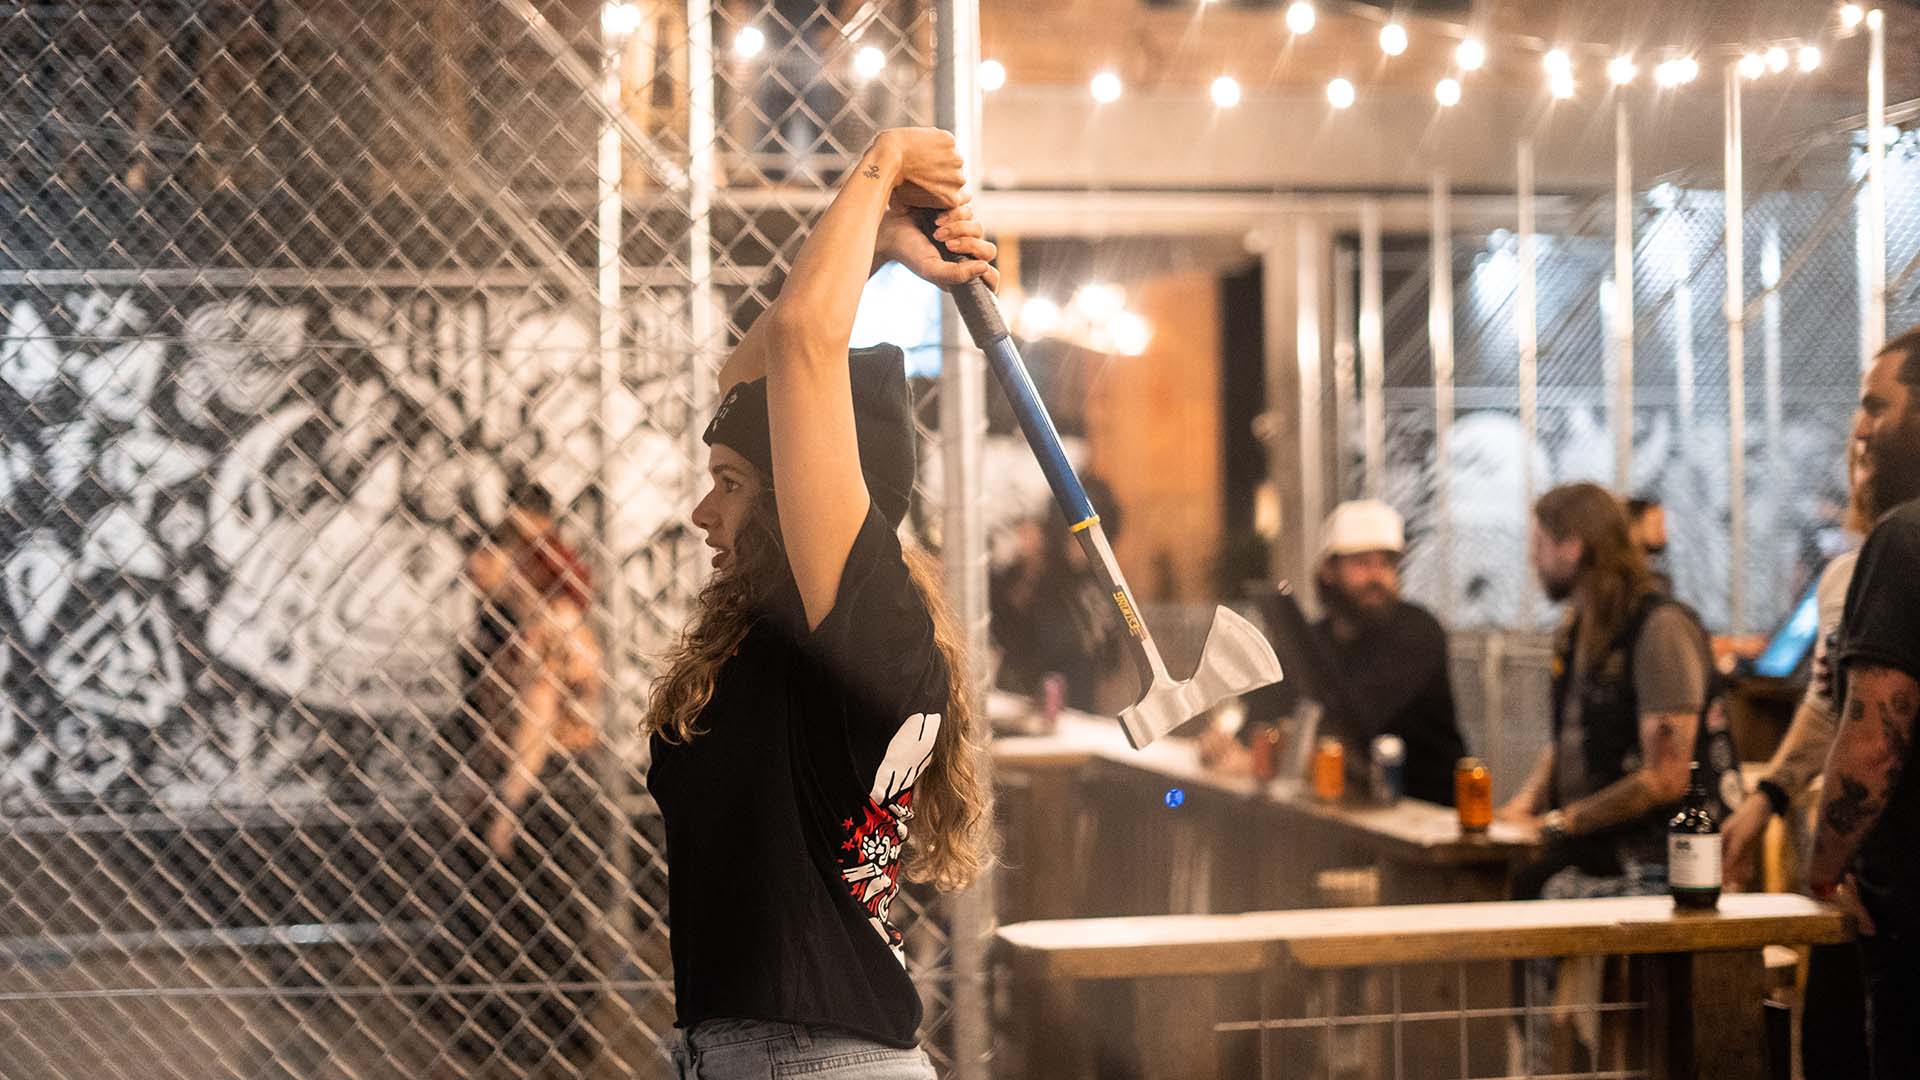 Maniax Is Opening Its Second Viking-Themed Axe-Throwing Queensland Joint on the Gold Coast